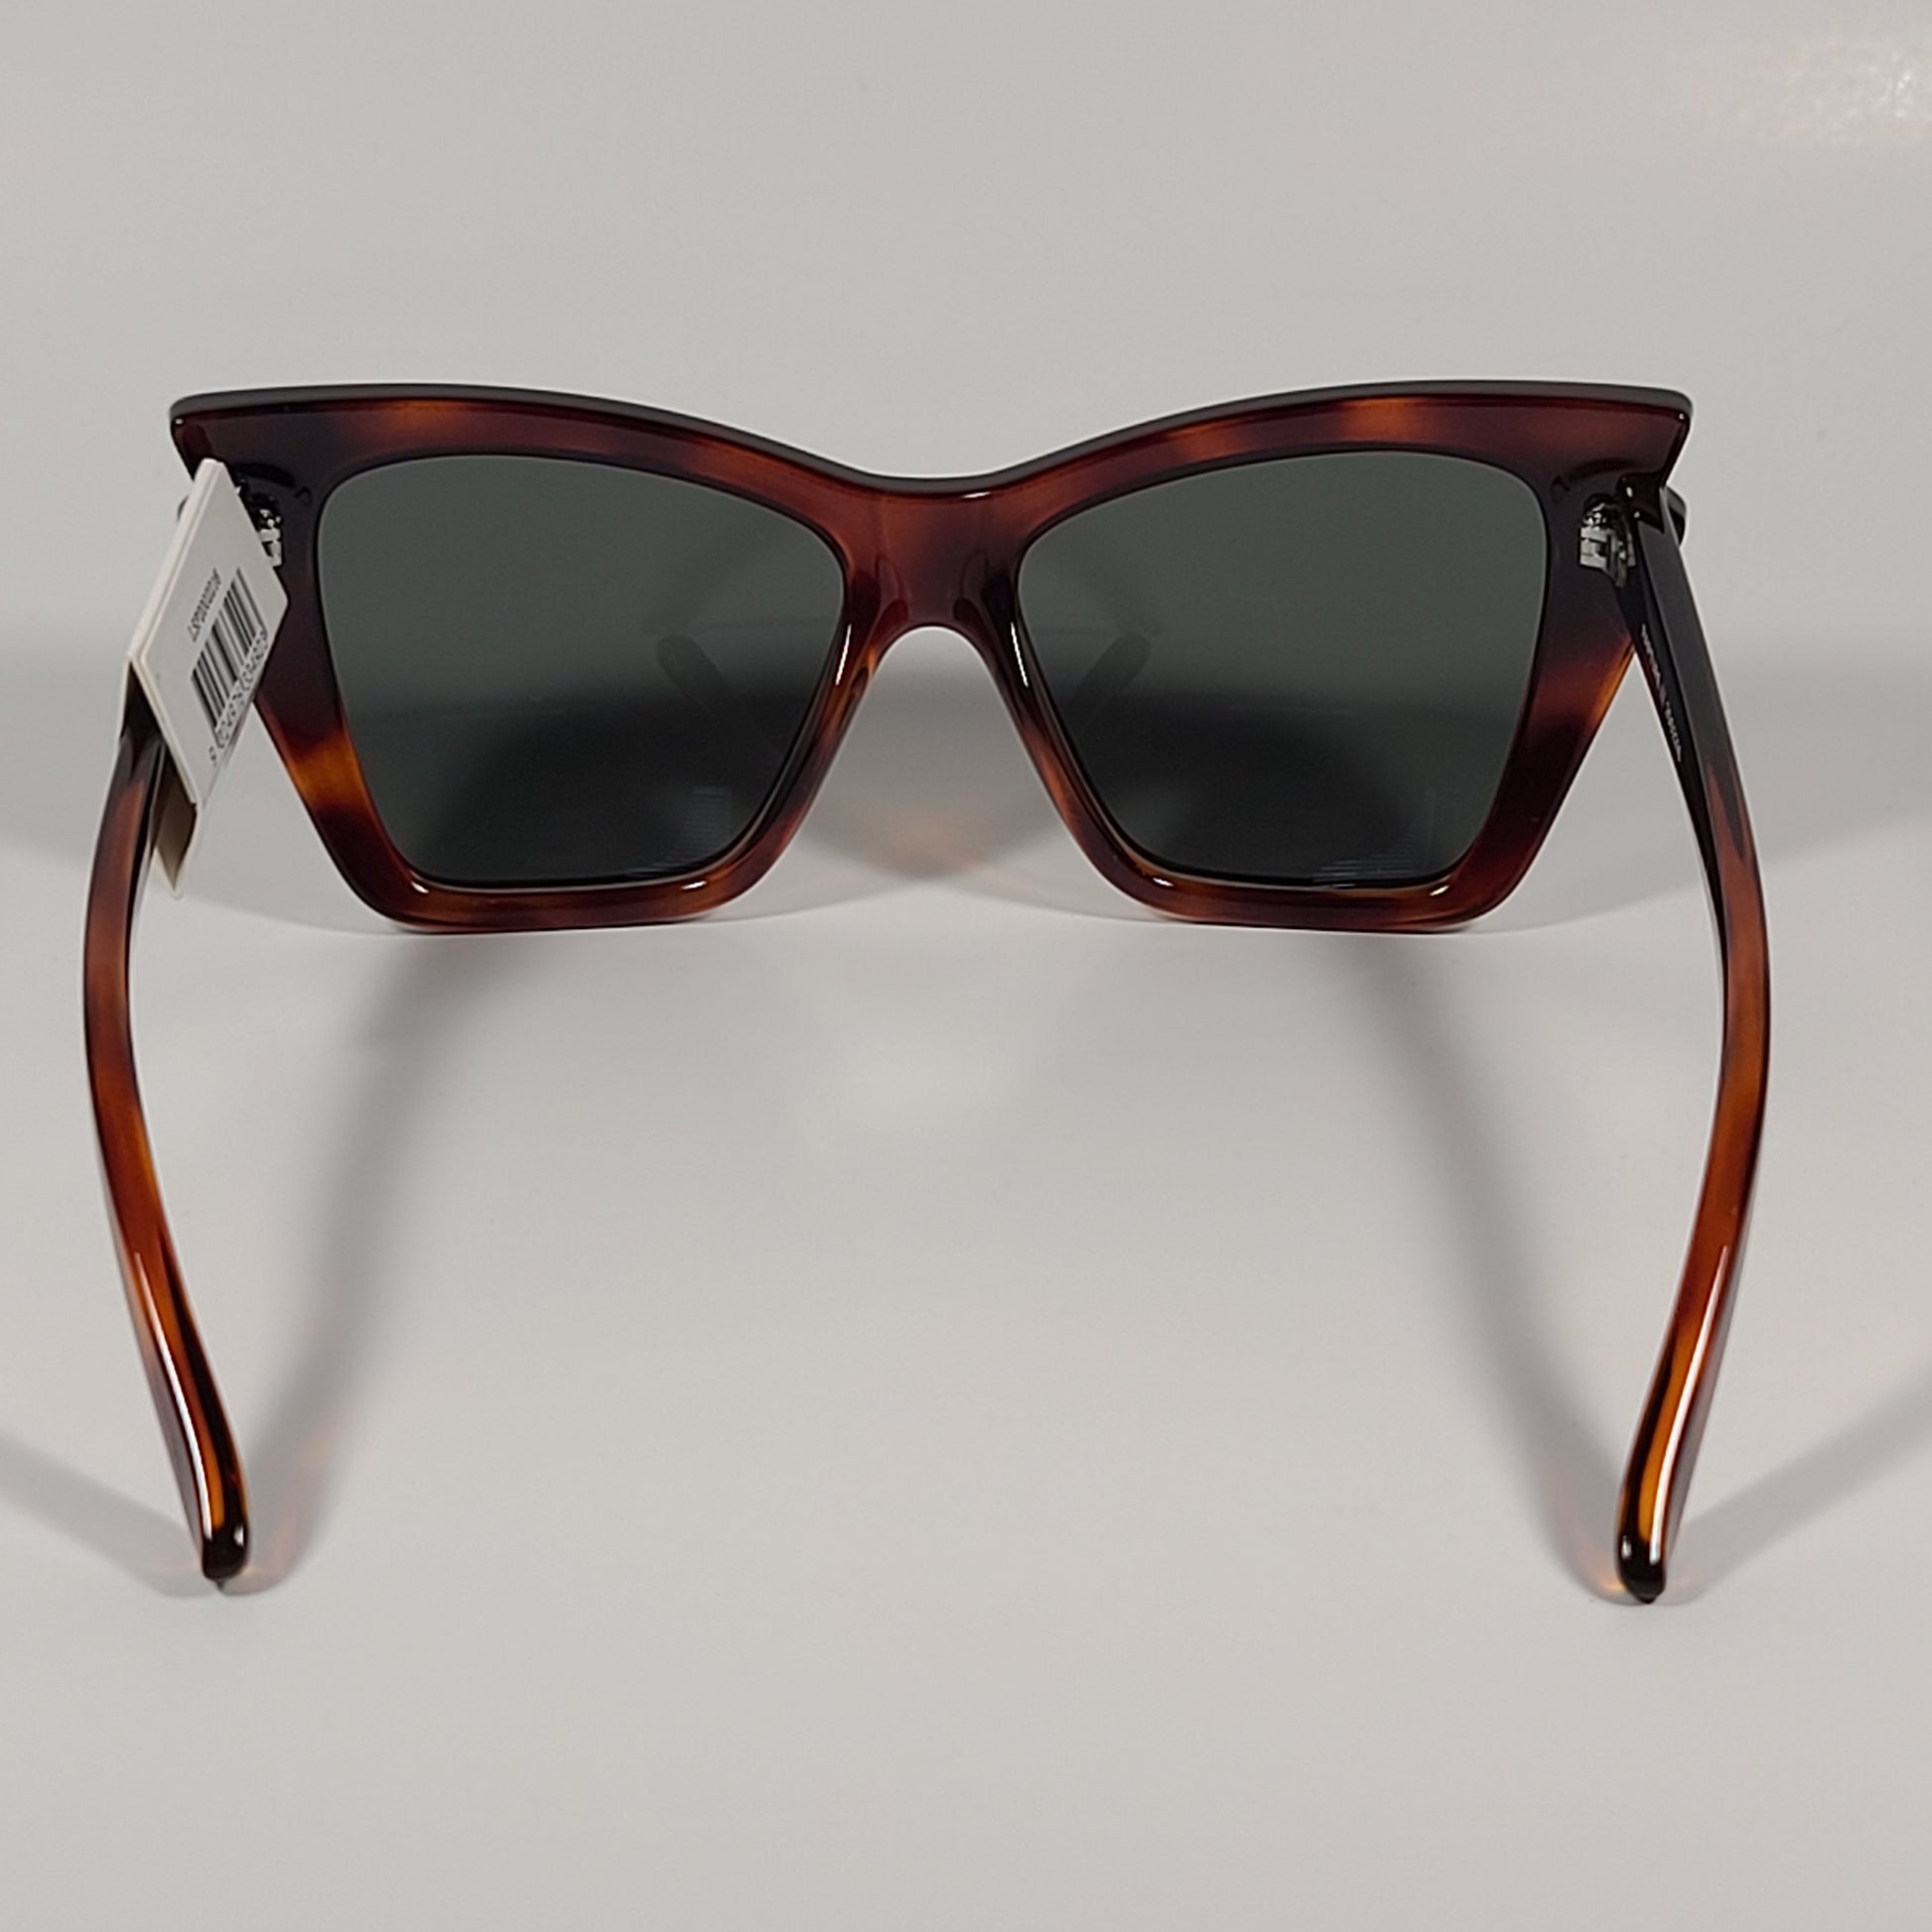 Le Specs Rapture Cat Eye Sunglasses Toffee Tortoise Frame Green Gray Solid Lens LSP2002216 - Sunglasses